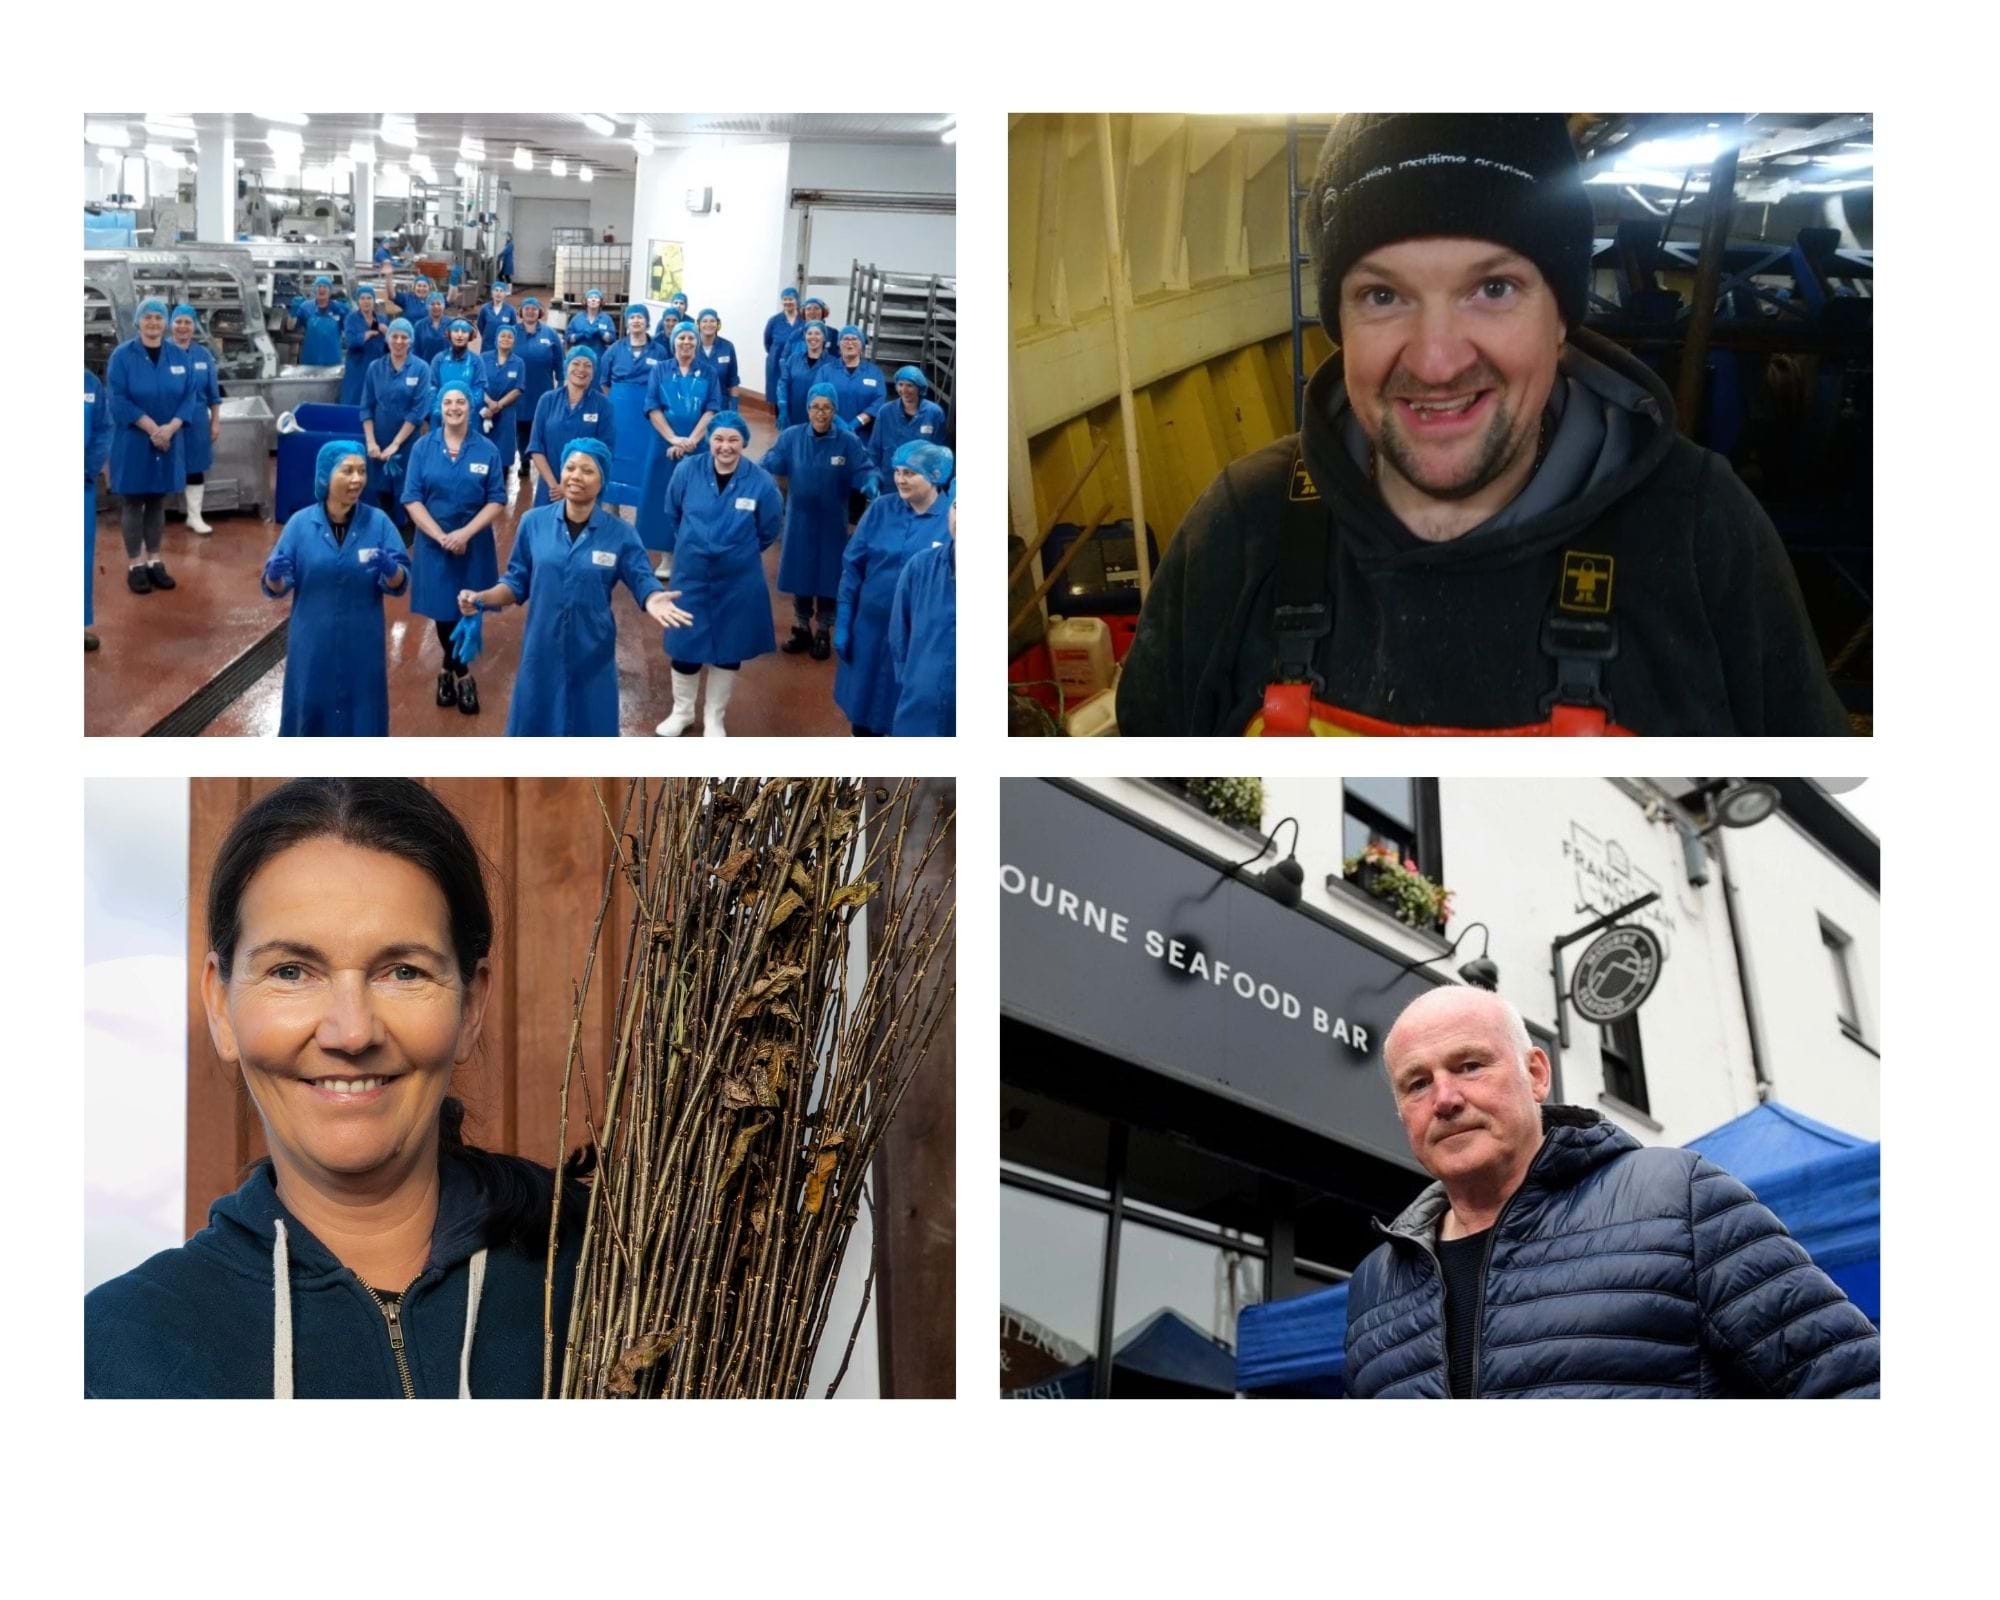 Collage photo of different people from the seafood industry